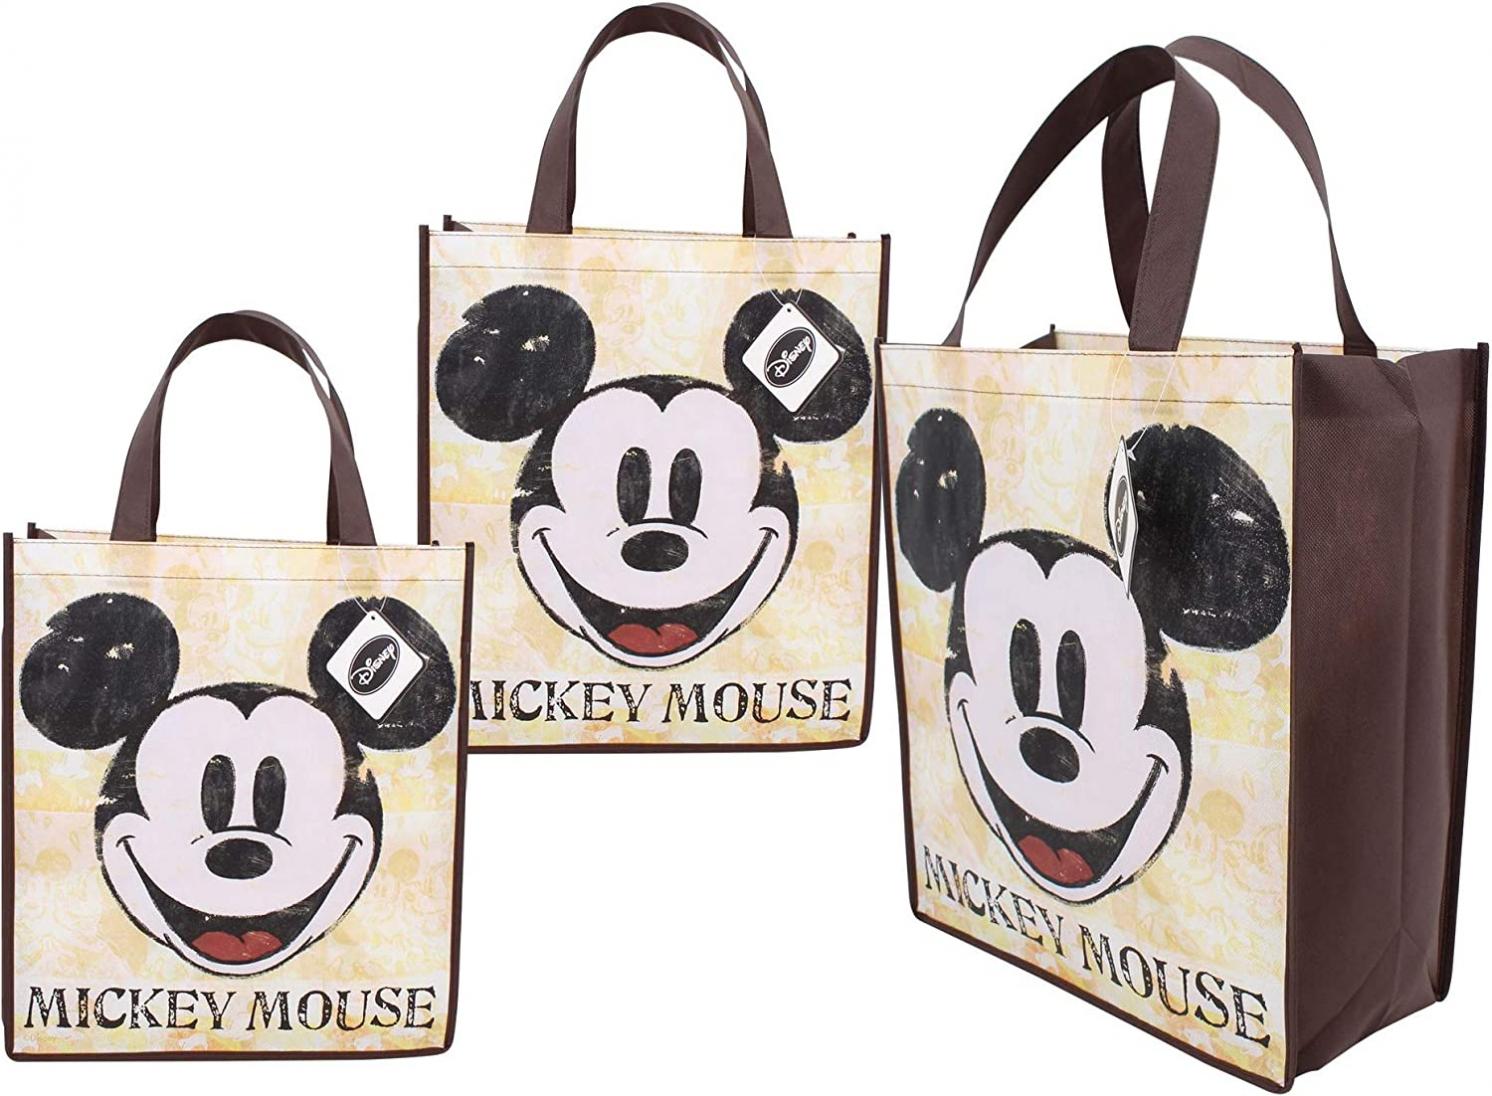 Disney [3-Pack] Mickey Mouse Vintage Style Large 15-inch Reusable Shopping Tote or Gift Bag, Brown